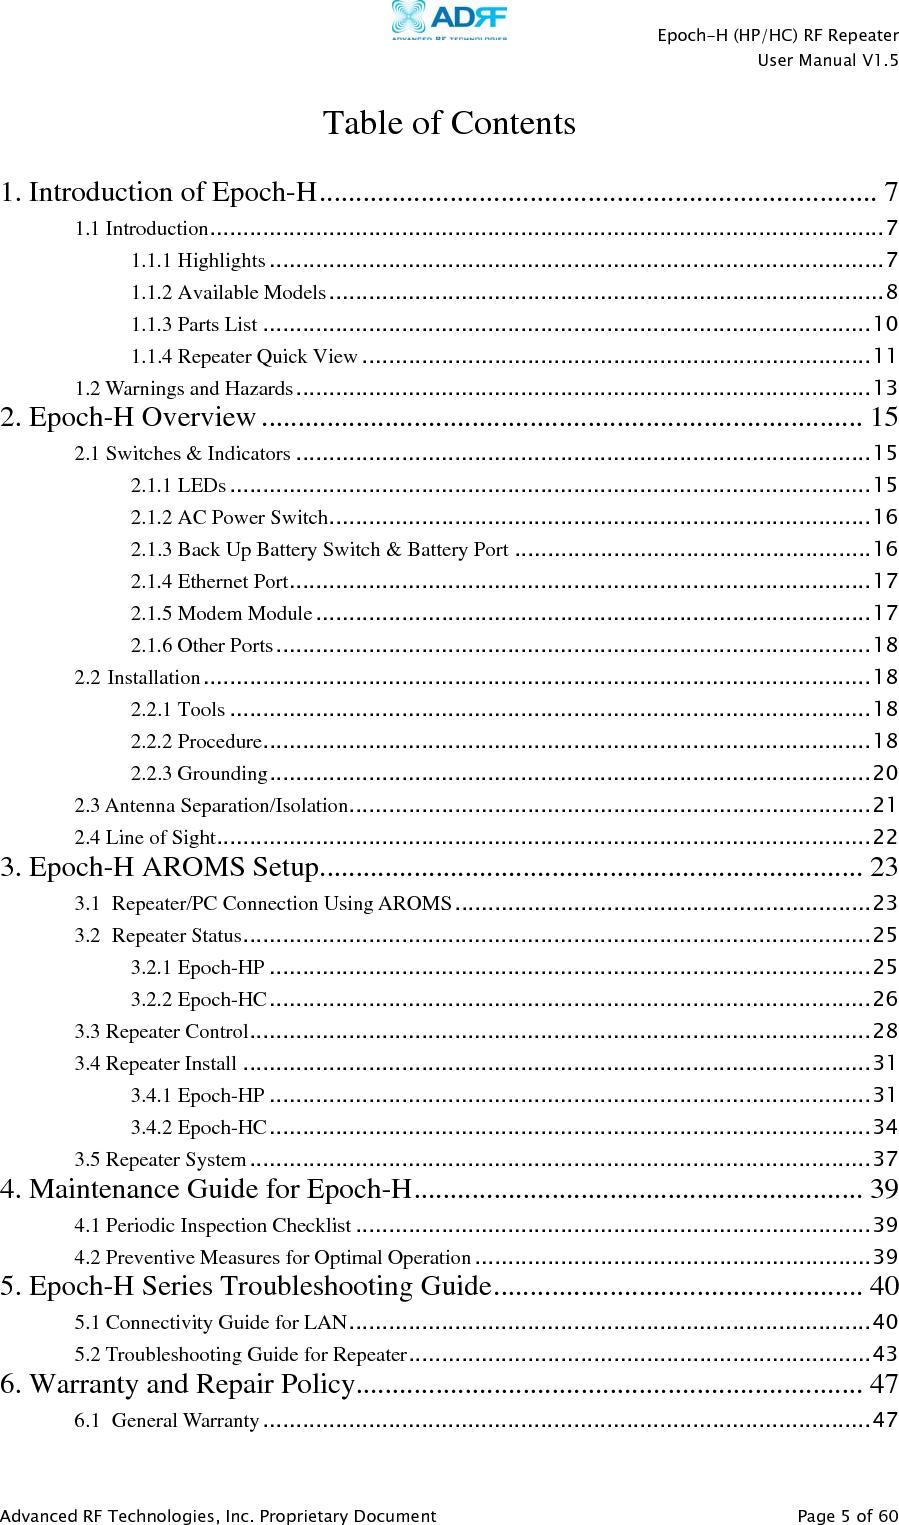    Epoch-H (HP/HC) RF Repeater  User Manual V1.5  Advanced RF Technologies, Inc. Proprietary Document   Page 5 of 60   Table of Contents  1. Introduction of Epoch-H ............................................................................. 7 1.1 Introduction ...................................................................................................... 7 1.1.1 Highlights ............................................................................................. 7 1.1.2 Available Models .................................................................................... 8 1.1.3 Parts List ............................................................................................ 10 1.1.4 Repeater Quick View ............................................................................. 11 1.2 Warnings and Hazards ....................................................................................... 13 2. Epoch-H Overview ................................................................................... 15 2.1 Switches &amp; Indicators ....................................................................................... 15 2.1.1 LEDs ................................................................................................. 15 2.1.2 AC Power Switch .................................................................................. 16 2.1.3 Back Up Battery Switch &amp; Battery Port ...................................................... 16 2.1.4 Ethernet Port ........................................................................................ 17 2.1.5 Modem Module .................................................................................... 17 2.1.6 Other Ports .......................................................................................... 18 2.2 Installation ..................................................................................................... 18 2.2.1 Tools ................................................................................................. 18 2.2.2 Procedure ............................................................................................ 18 2.2.3 Grounding ........................................................................................... 20 2.3 Antenna Separation/Isolation ............................................................................... 21 2.4 Line of Sight ................................................................................................... 22 3. Epoch-H AROMS Setup ...........................................................................  23 3.1 Repeater/PC Connection Using AROMS ............................................................... 23 3.2 Repeater Status ............................................................................................... 25 3.2.1 Epoch-HP ........................................................................................... 25 3.2.2 Epoch-HC ........................................................................................... 26 3.3 Repeater Control .............................................................................................. 28 3.4 Repeater Install ............................................................................................... 31 3.4.1 Epoch-HP ........................................................................................... 31 3.4.2 Epoch-HC ........................................................................................... 34 3.5 Repeater System .............................................................................................. 37 4. Maintenance Guide for Epoch-H ..............................................................  39 4.1 Periodic Inspection Checklist .............................................................................. 39 4.2 Preventive Measures for Optimal Operation ............................................................ 39 5. Epoch-H Series Troubleshooting Guide ...................................................  40 5.1 Connectivity Guide for LAN ............................................................................... 40 5.2 Troubleshooting Guide for Repeater ...................................................................... 43 6. Warranty and Repair Policy ......................................................................  47 6.1 General Warranty ............................................................................................ 47 